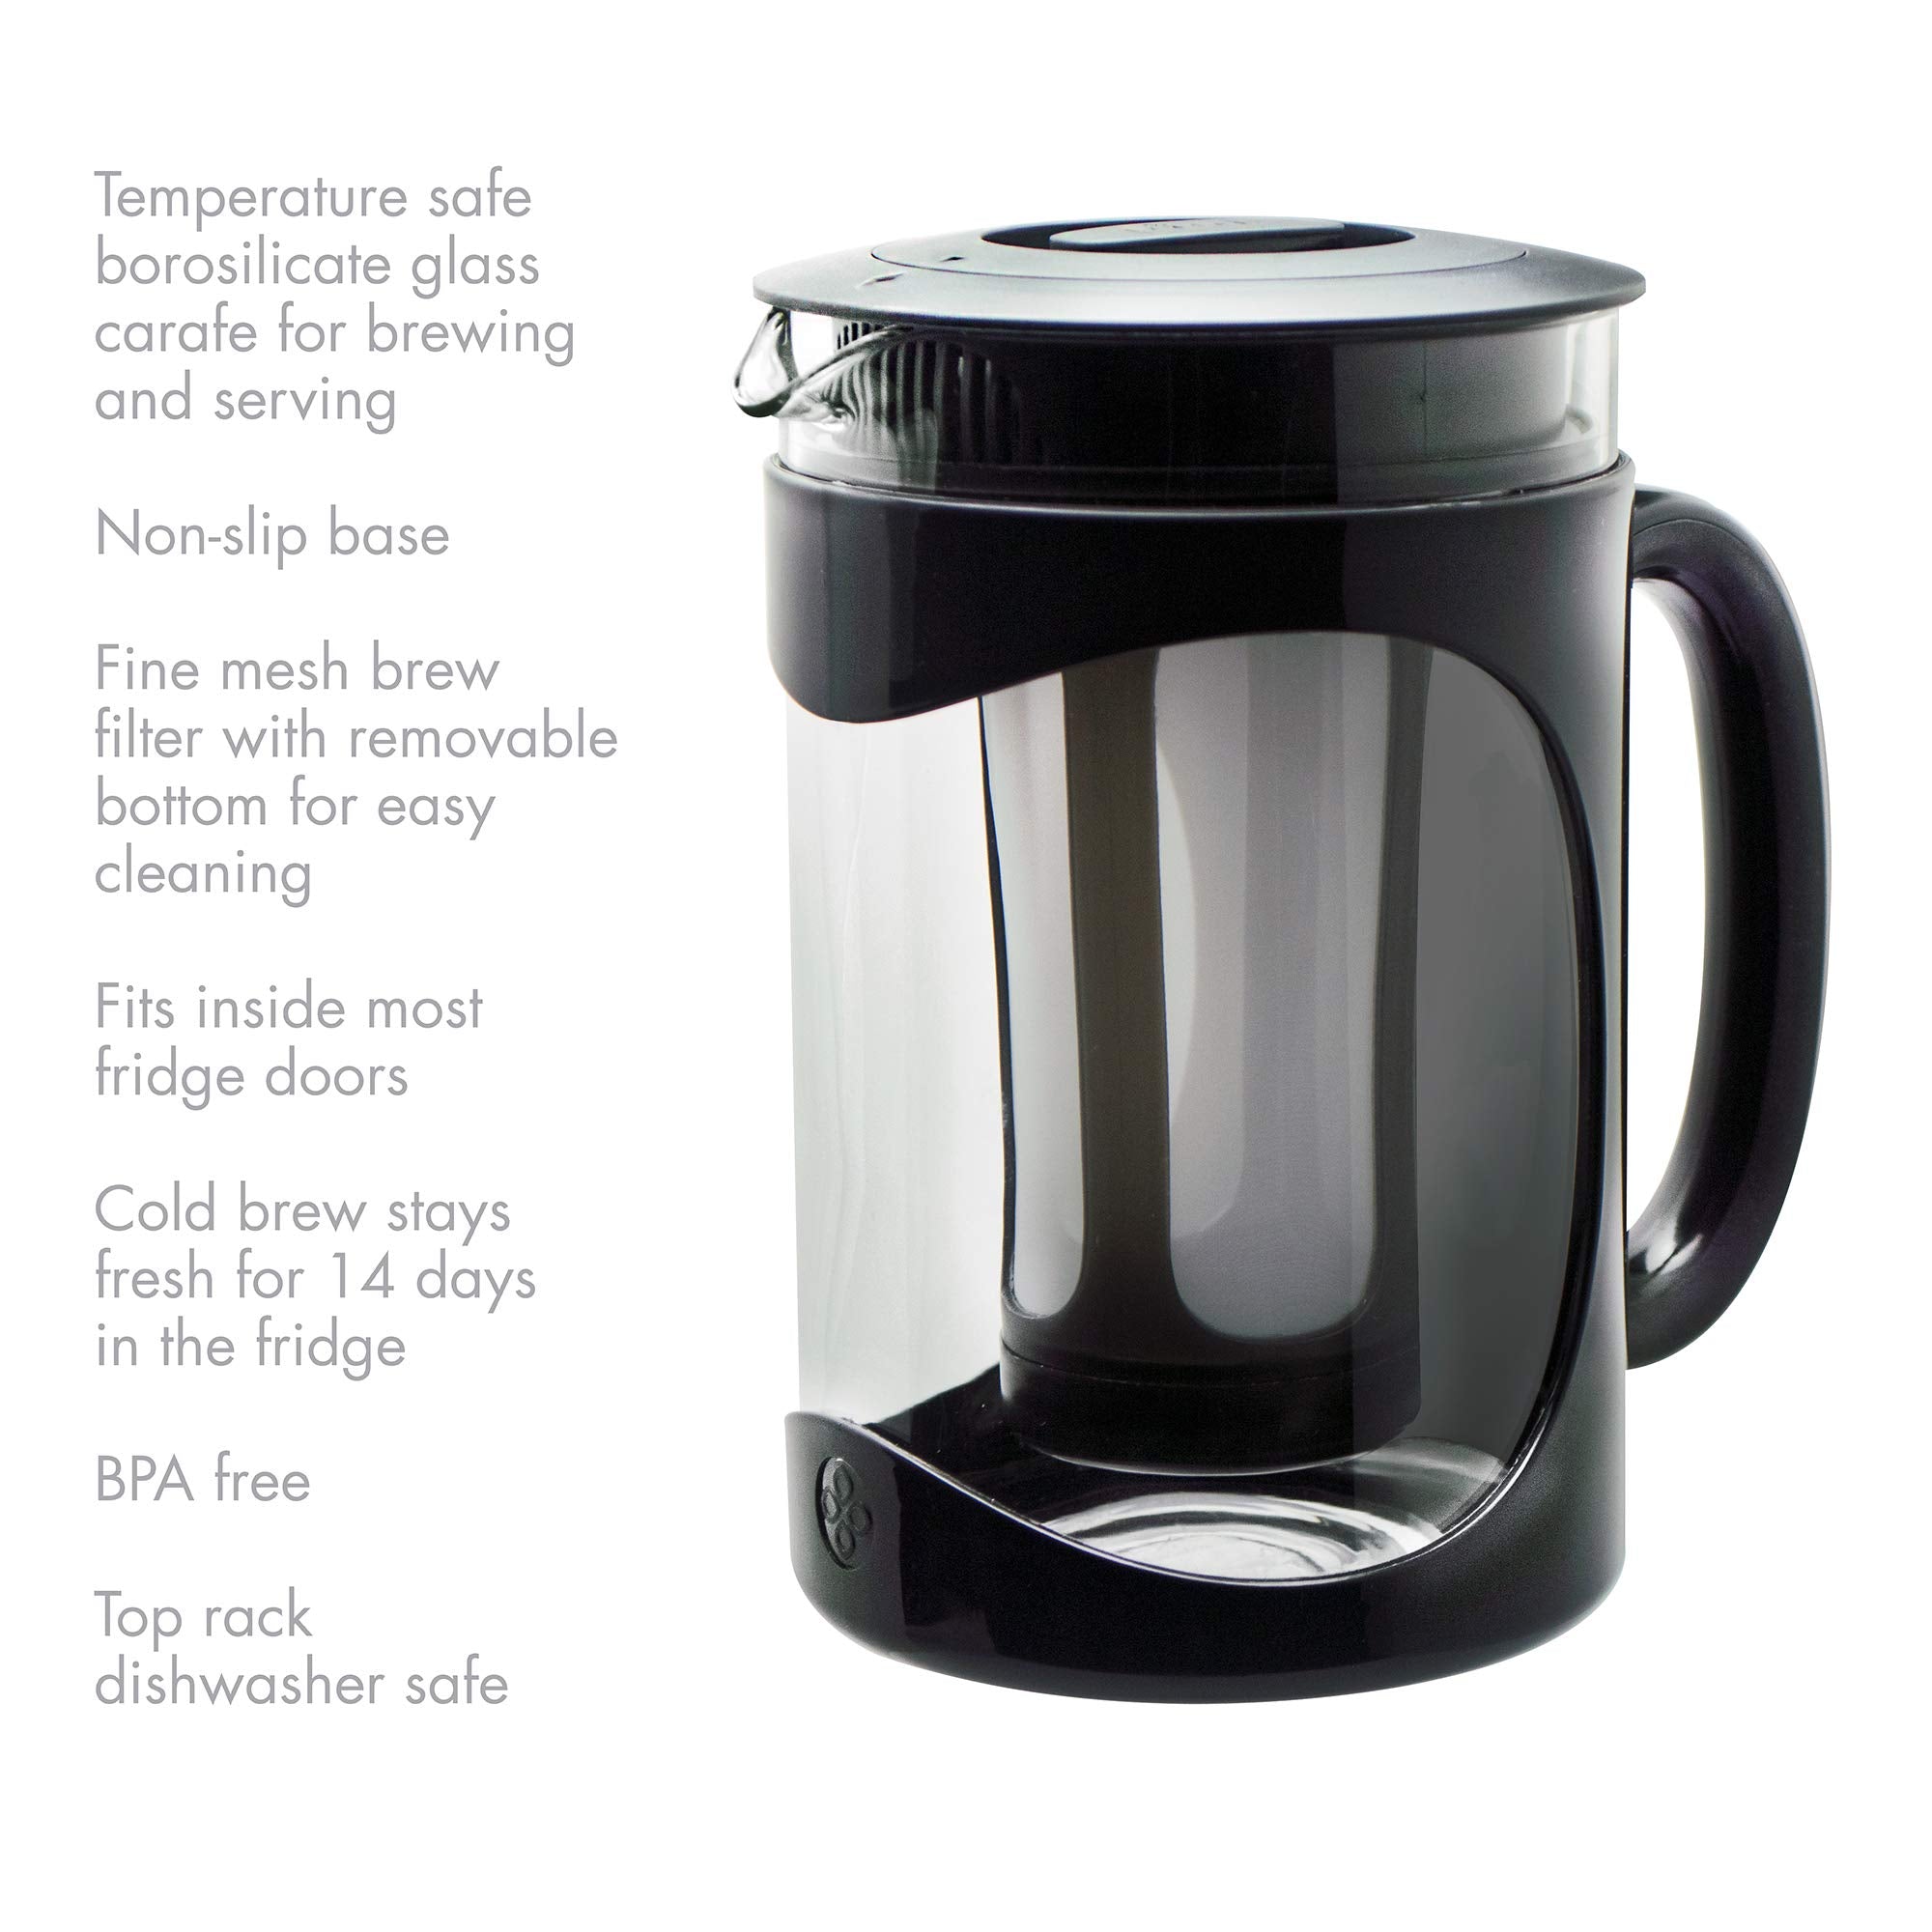 Primula Burke Deluxe Cold Brew Iced Coffee Maker, How to use and